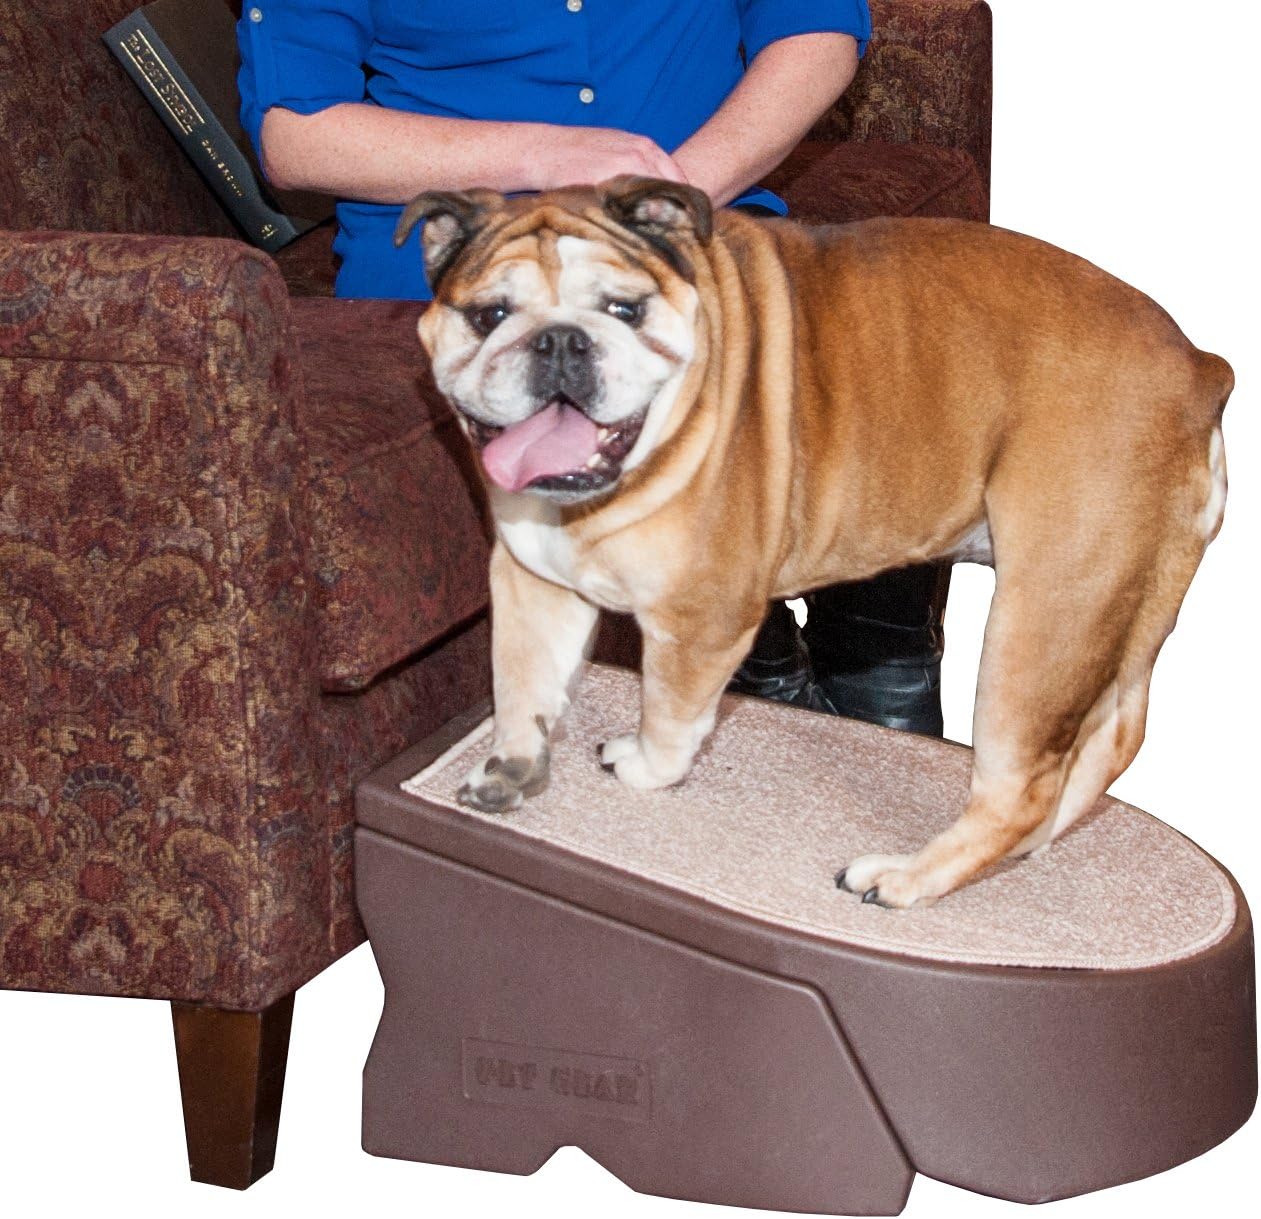 Pet Gear Stramp Stair and Ramp Combination for Dogs\/Cats, Easy Step, Lightweight\/Portable, Sturdy, Easy Assembly (No Tools Required) 1 Model, Available in 5 Colors